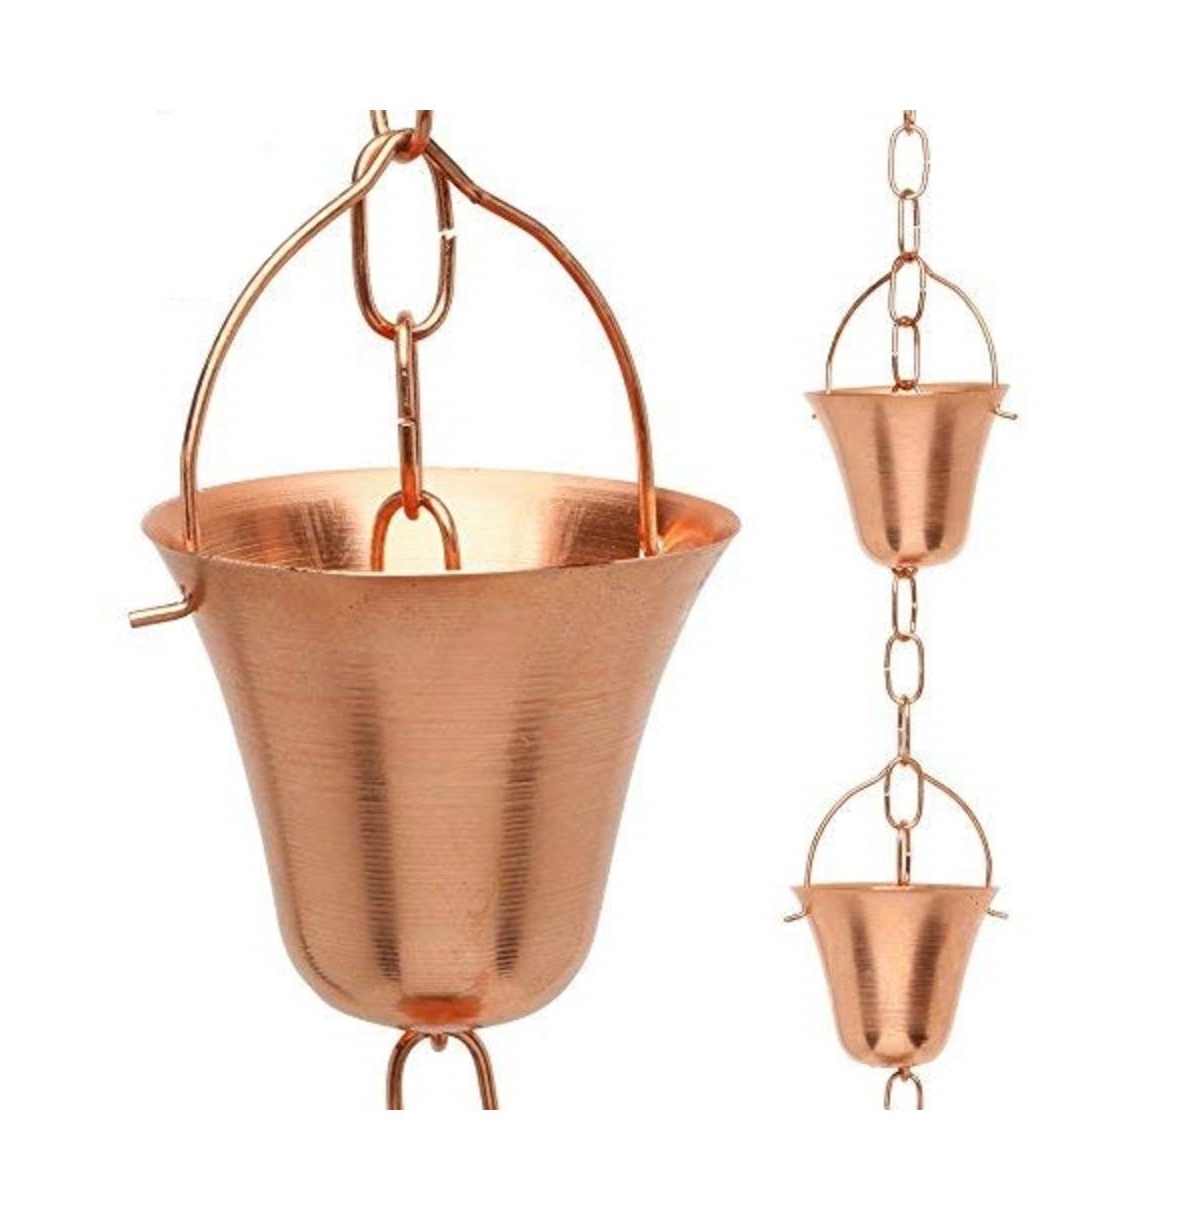 Copper Rain Chain with Bell Style Cups for Gutter Downspout Replacement - Copper